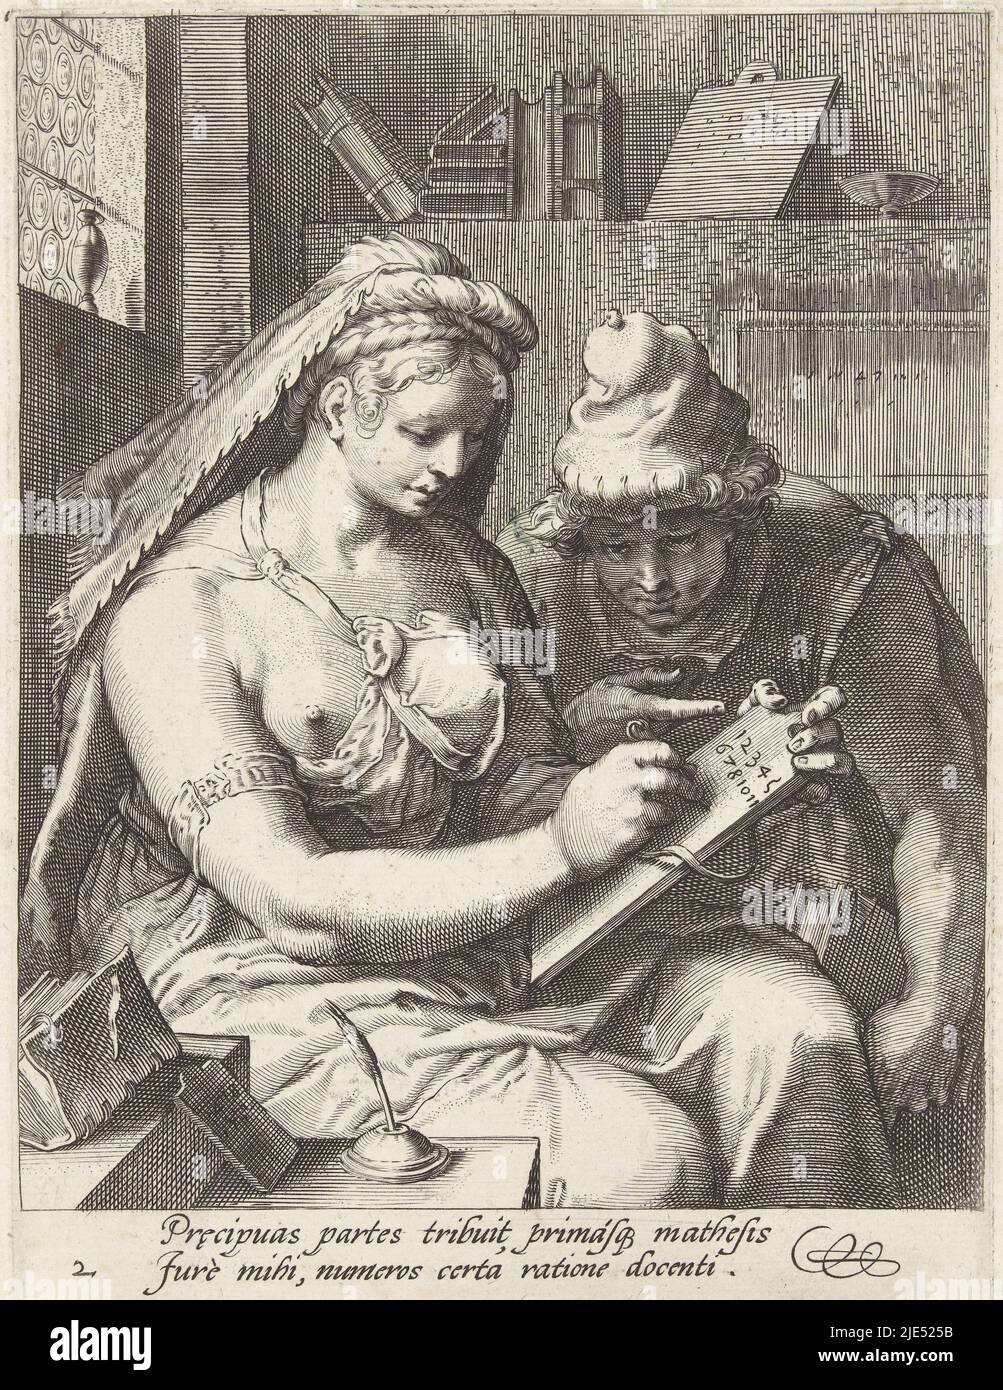 Arithmetic writes the numbers from 1-11 on a reading board. A pupil, with a hat and book in his hand, is watching her. On the table and on the wall on a shelf are books and writing tables. With a Latin caption by C. Schonaeus, Arithmetic (Arithmetic) The Seven Free Arts (series title)., print maker: Cornelis Jacobsz. Drebbel, Hendrick Goltzius, Cornelius Schonaeus, print maker: Netherlands, Haarlem, 1587 - 1605, paper, engraving, h 178 mm × w 132 mm Stock Photo